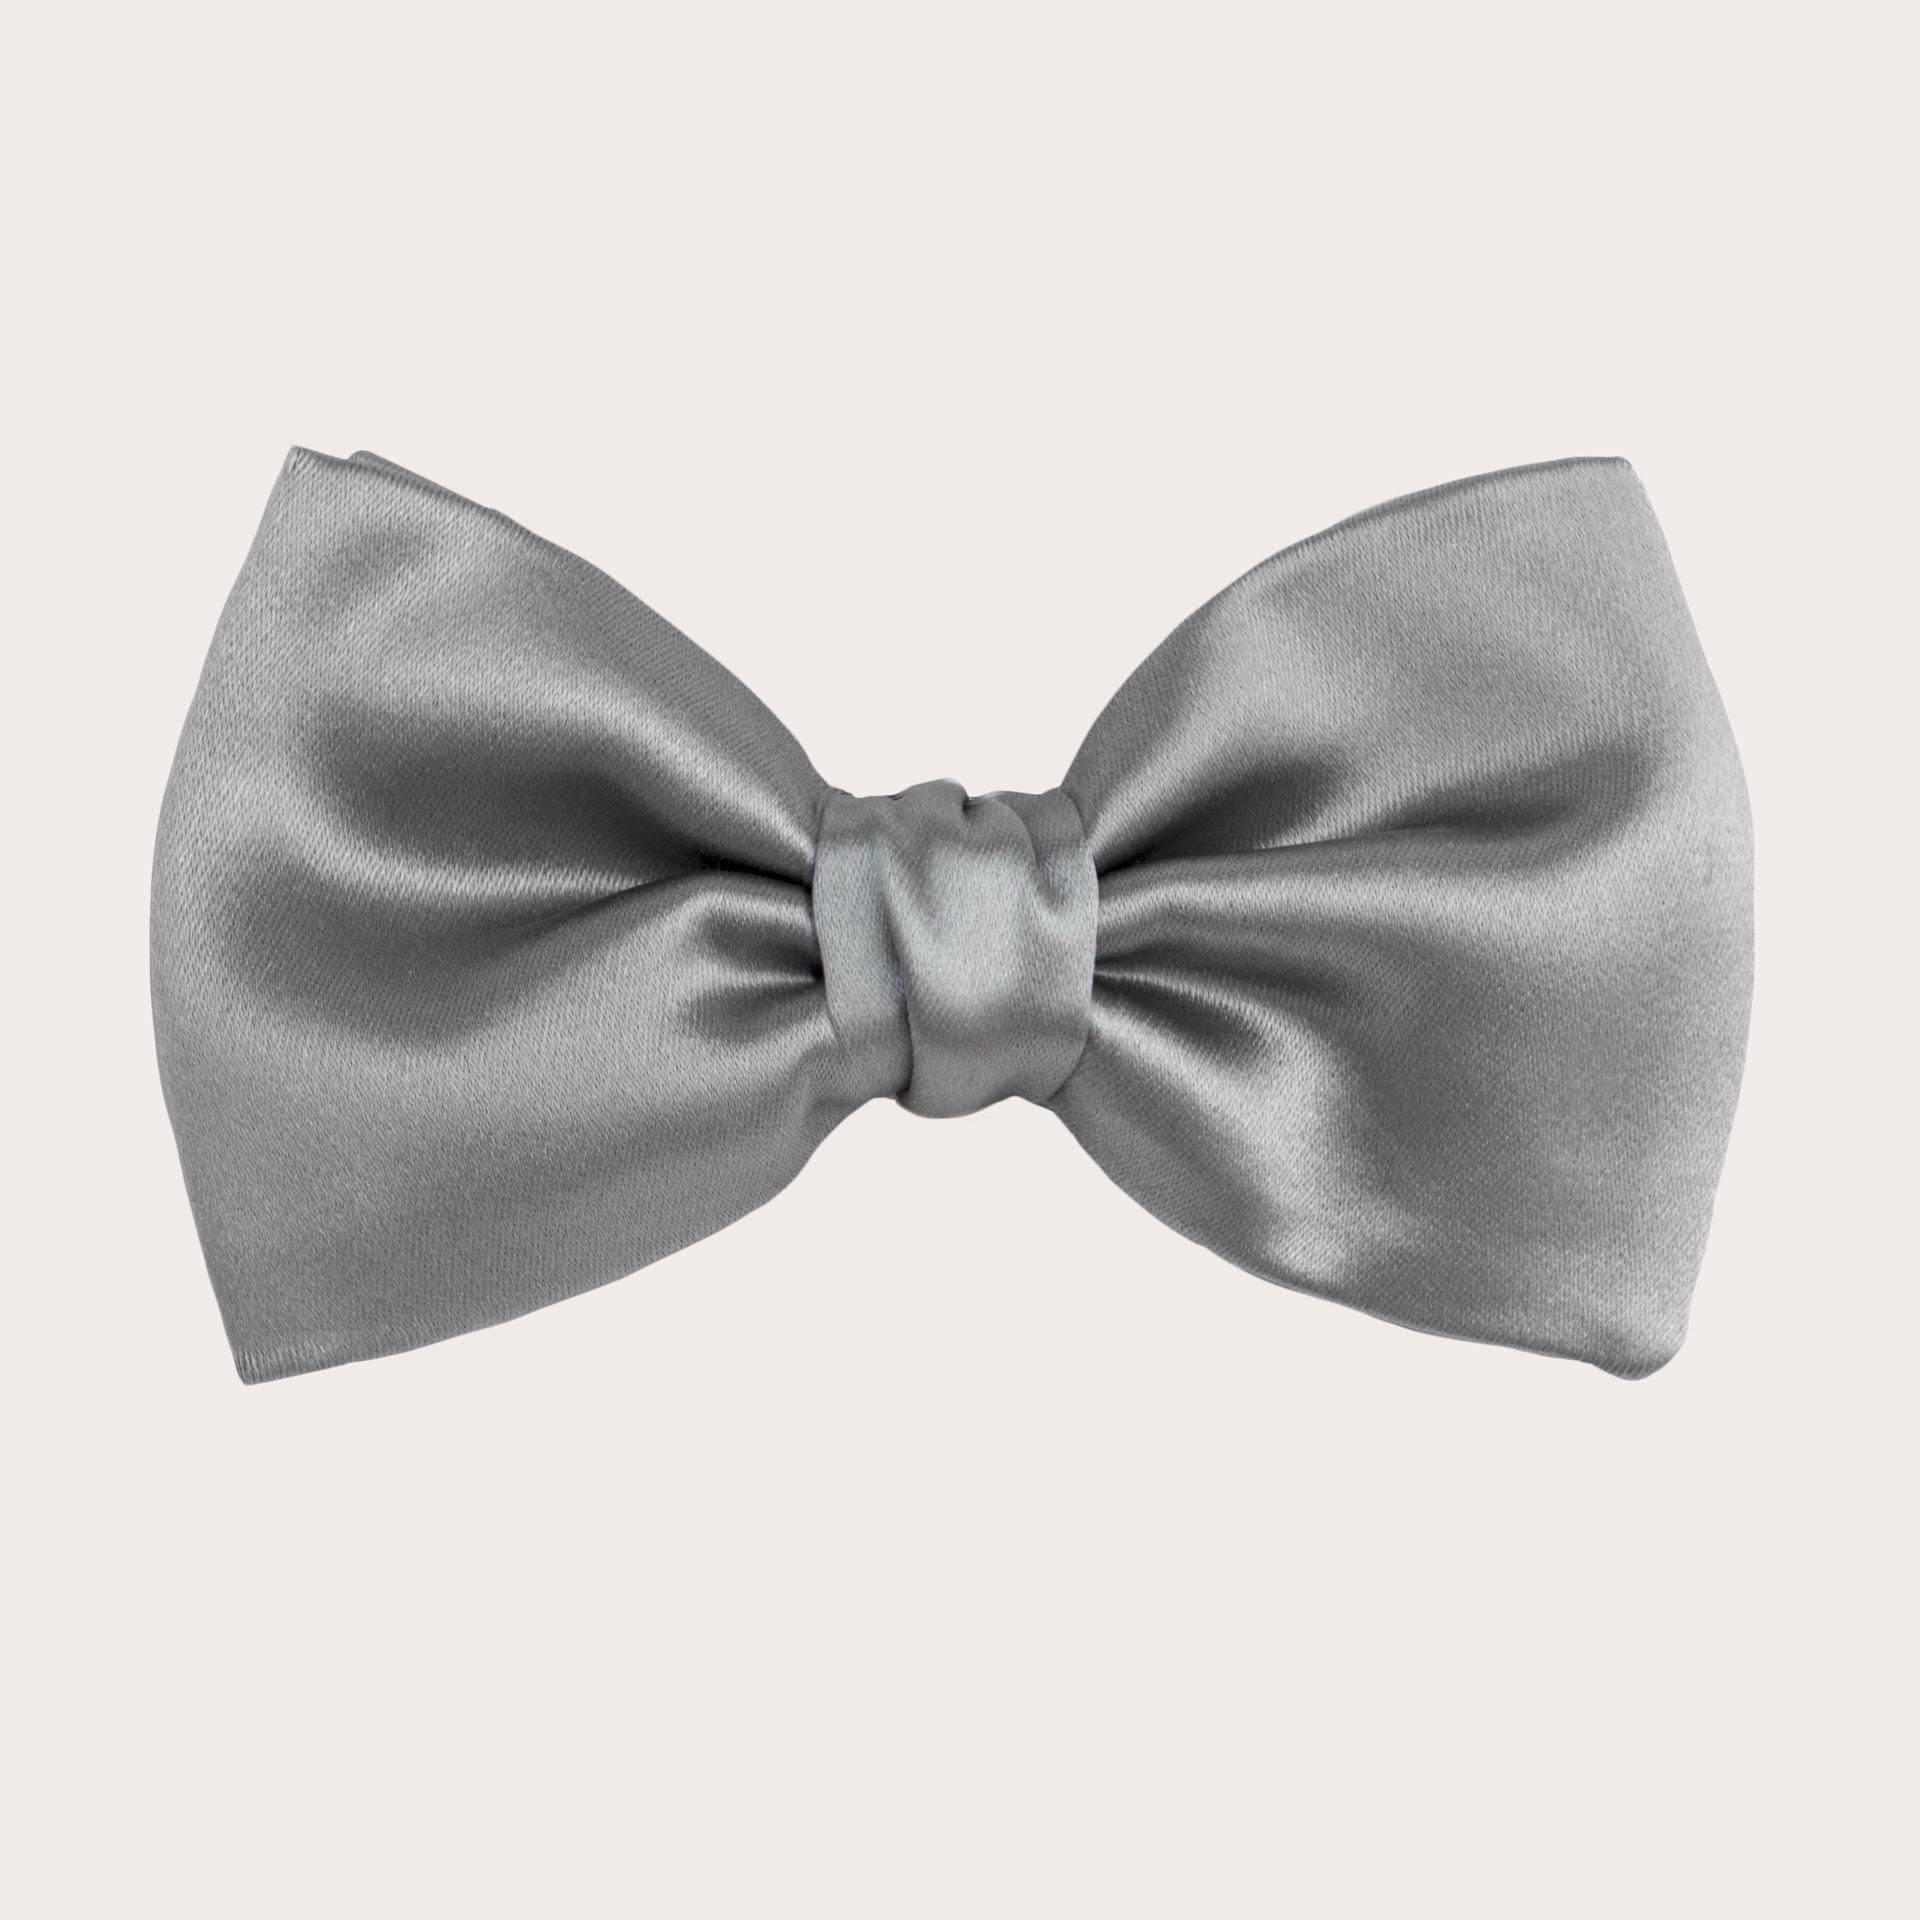 BRUCLE Bow tie in jacquard silk, multicolor pattern